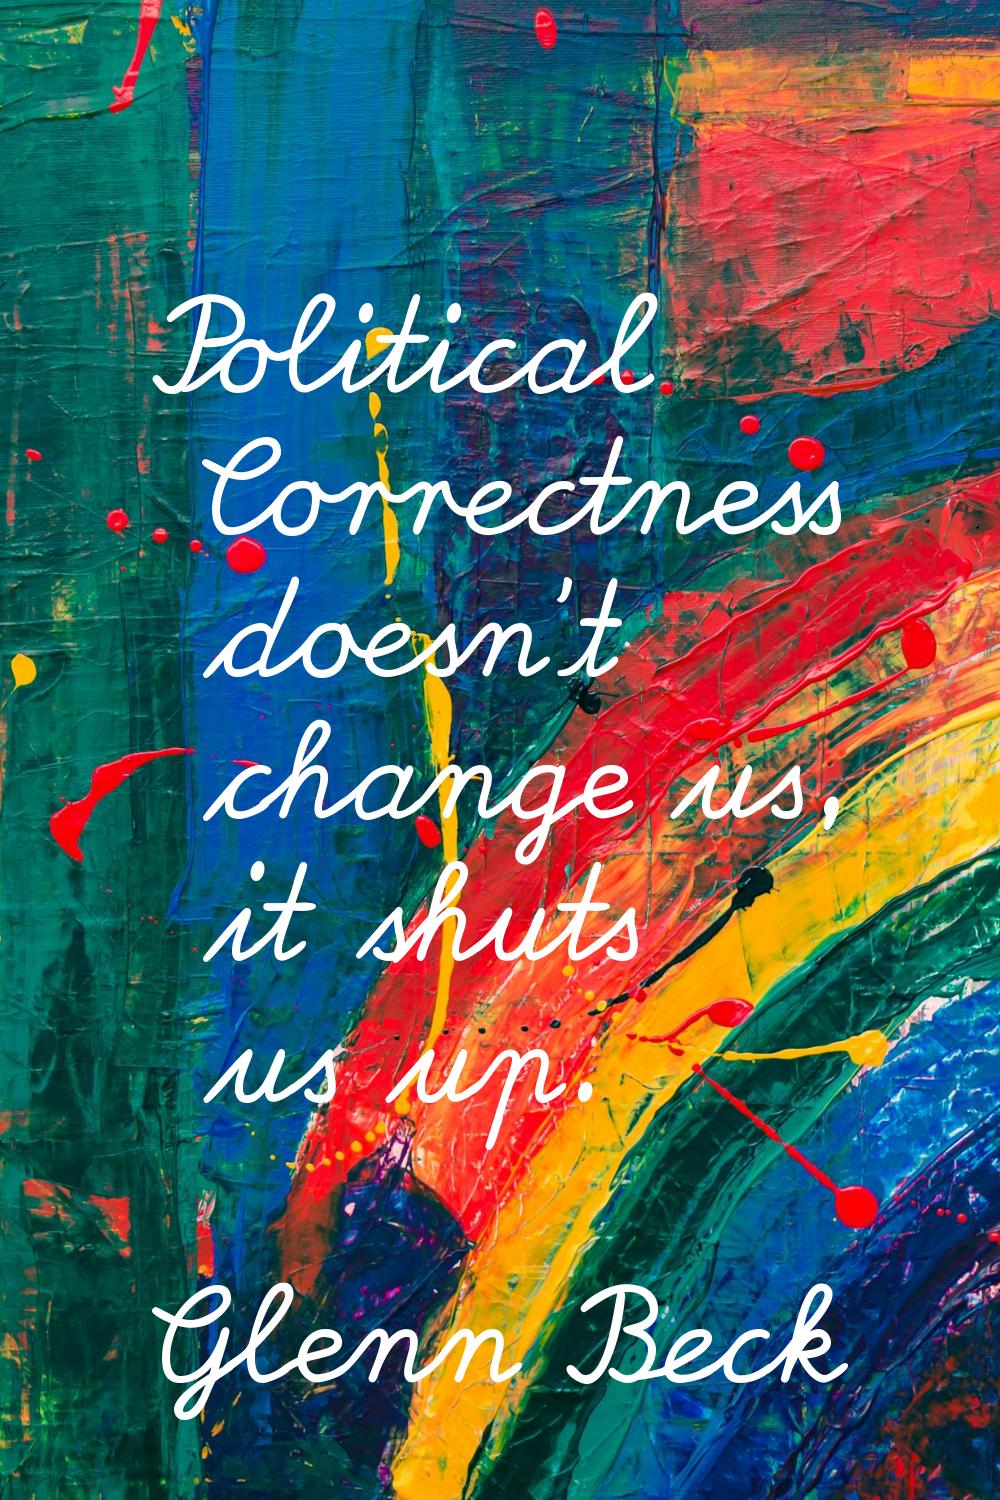 Political Correctness doesn't change us, it shuts us up.